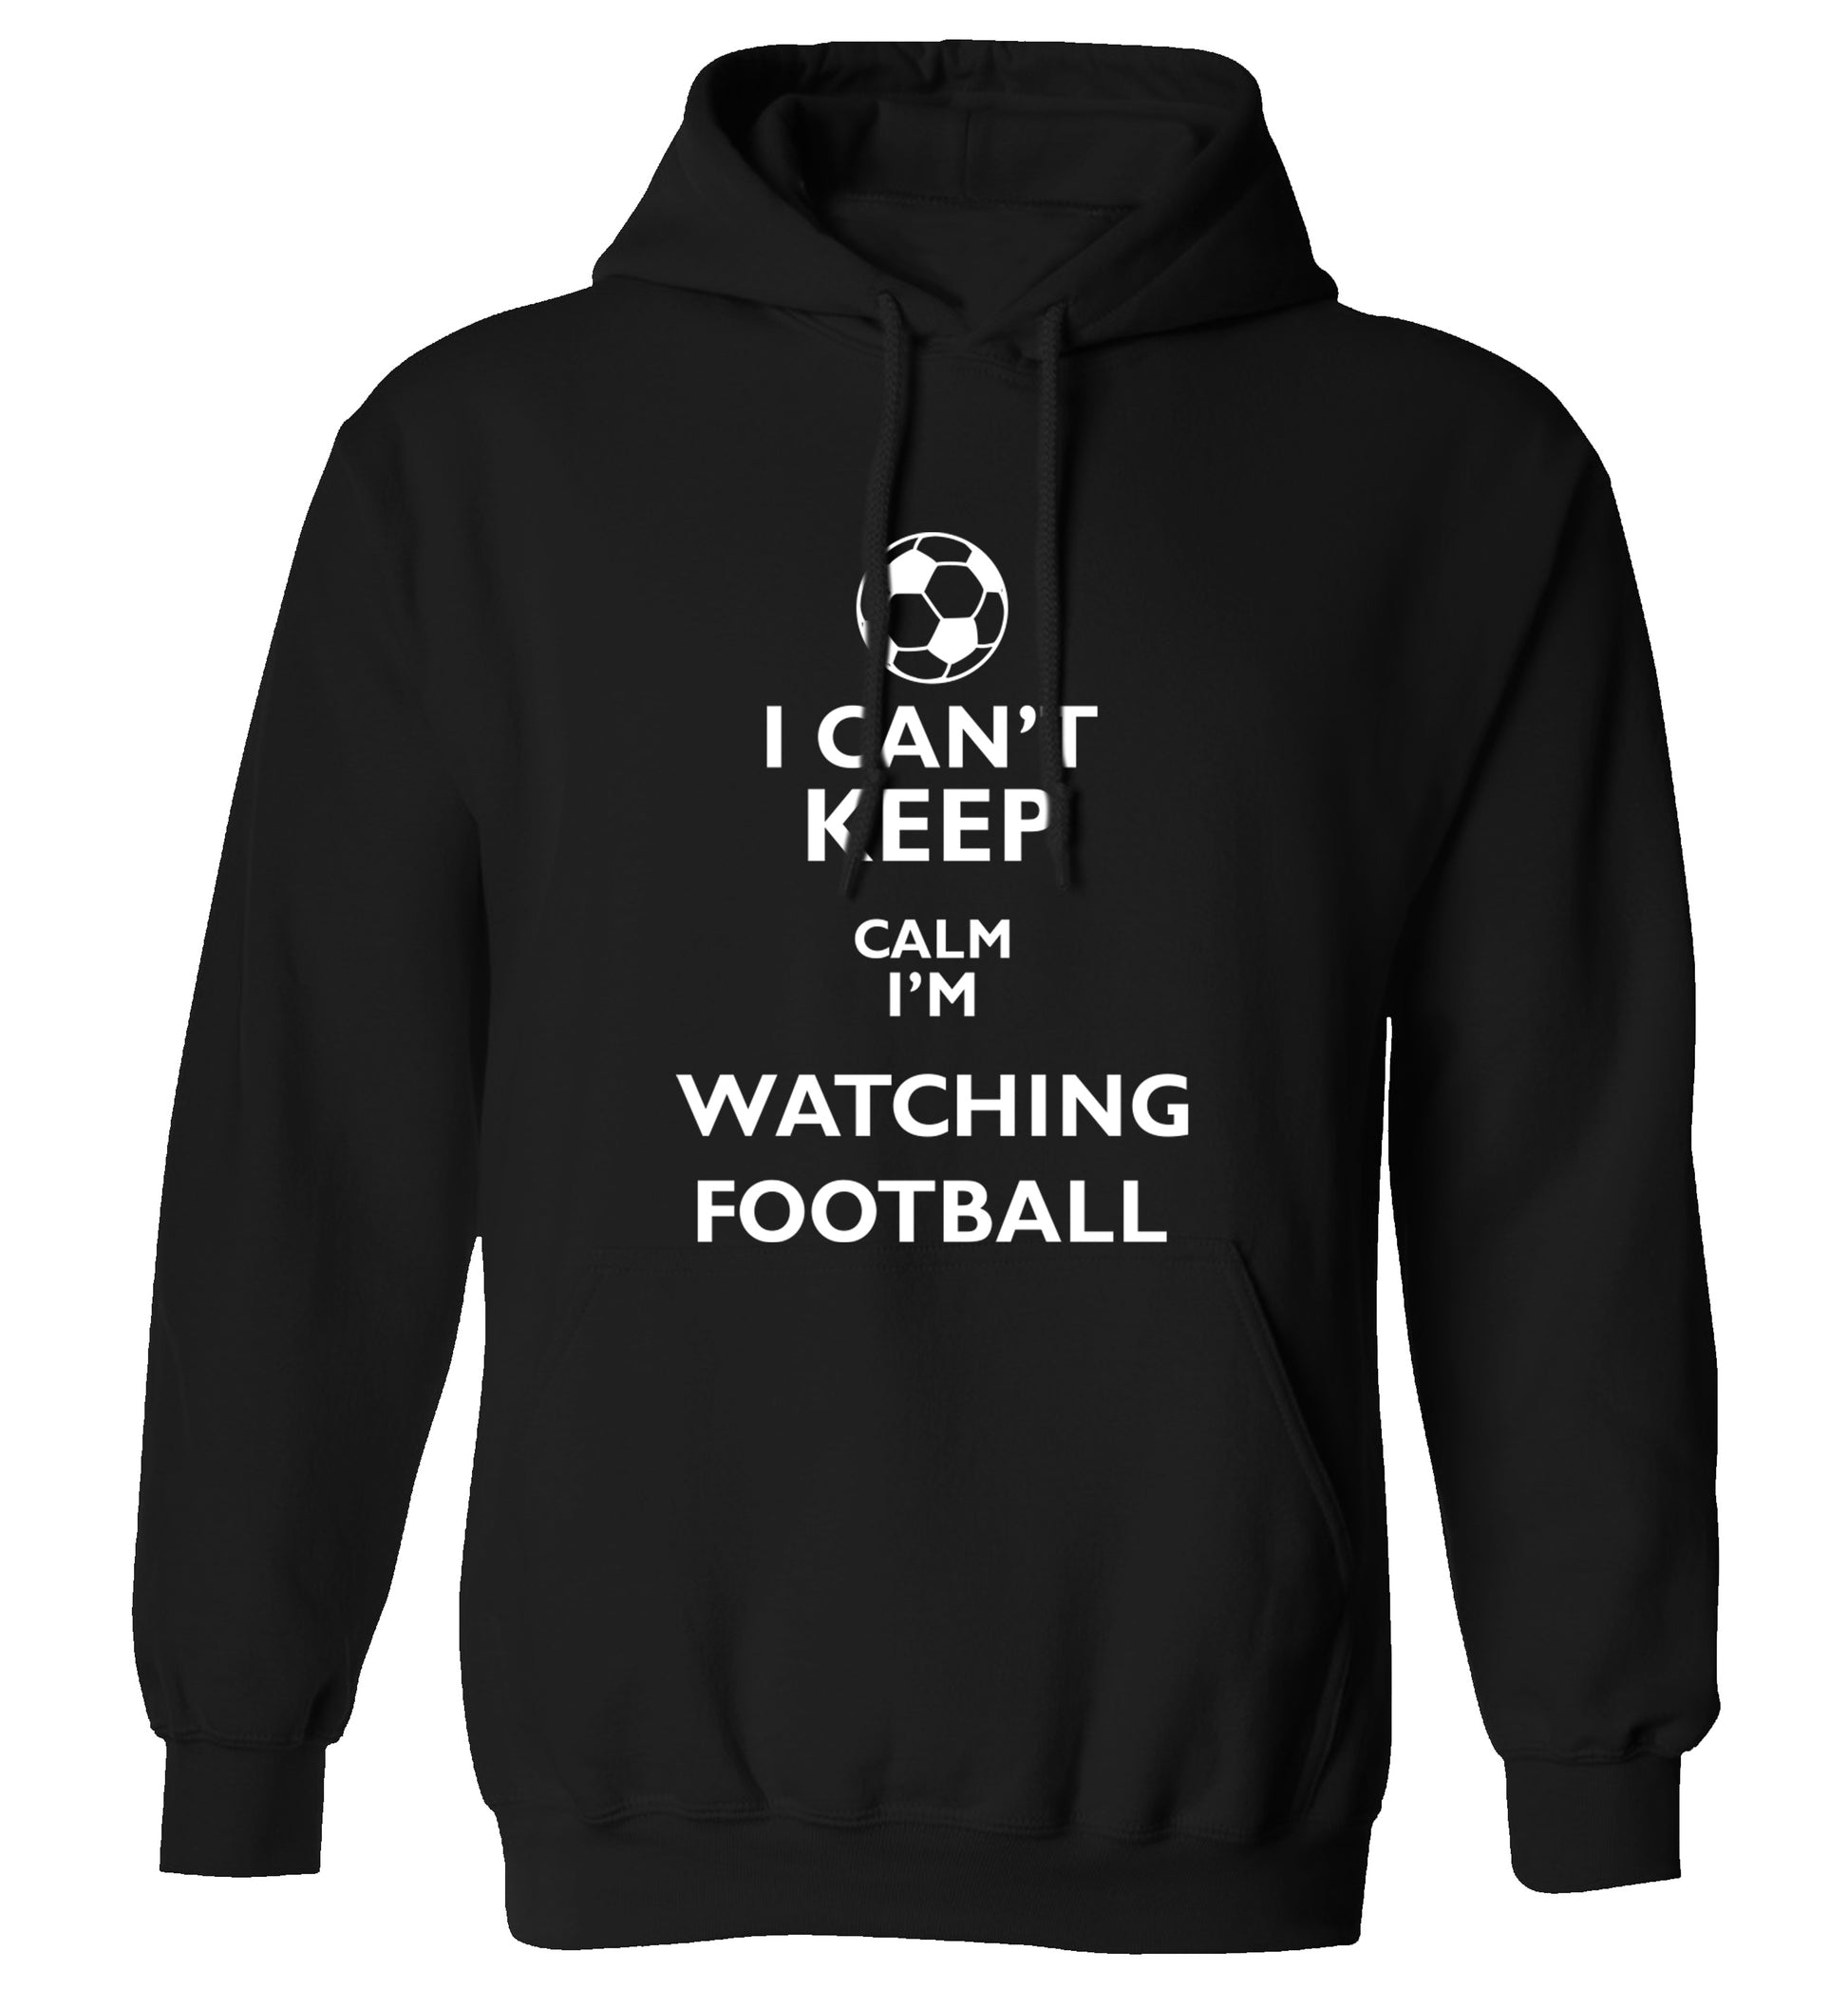 I can't keep calm I'm watching the football adults unisexblack hoodie 2XL